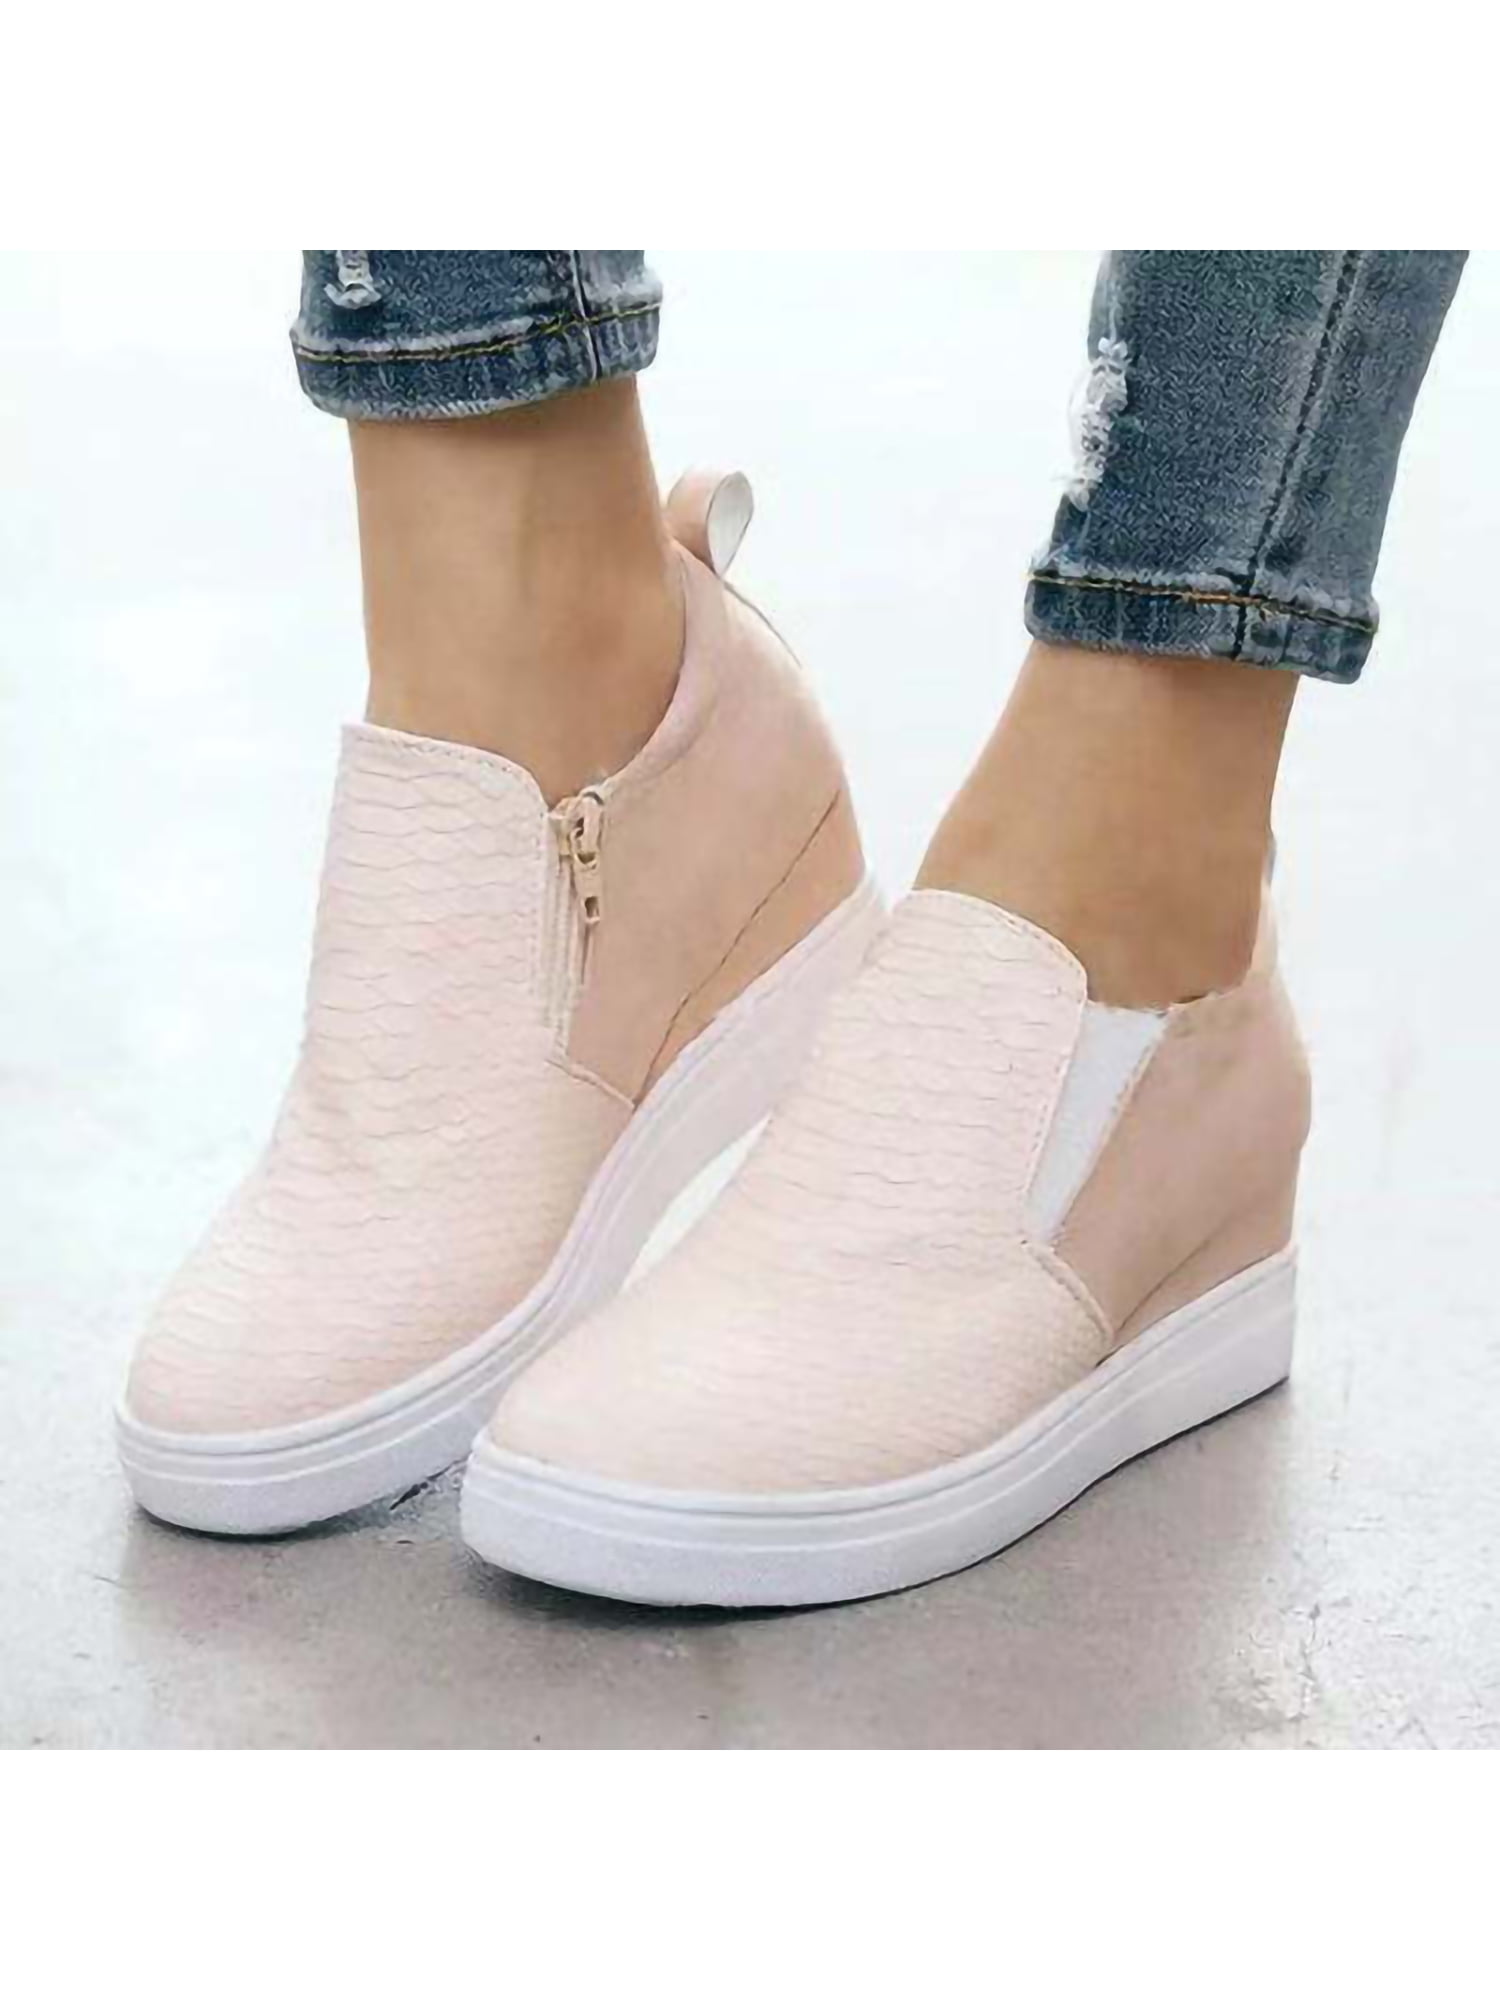 Audeban Womens High Heel Sneakers Hidden Sneakers Shoes Best Chioce for Casual and Daily Wear -